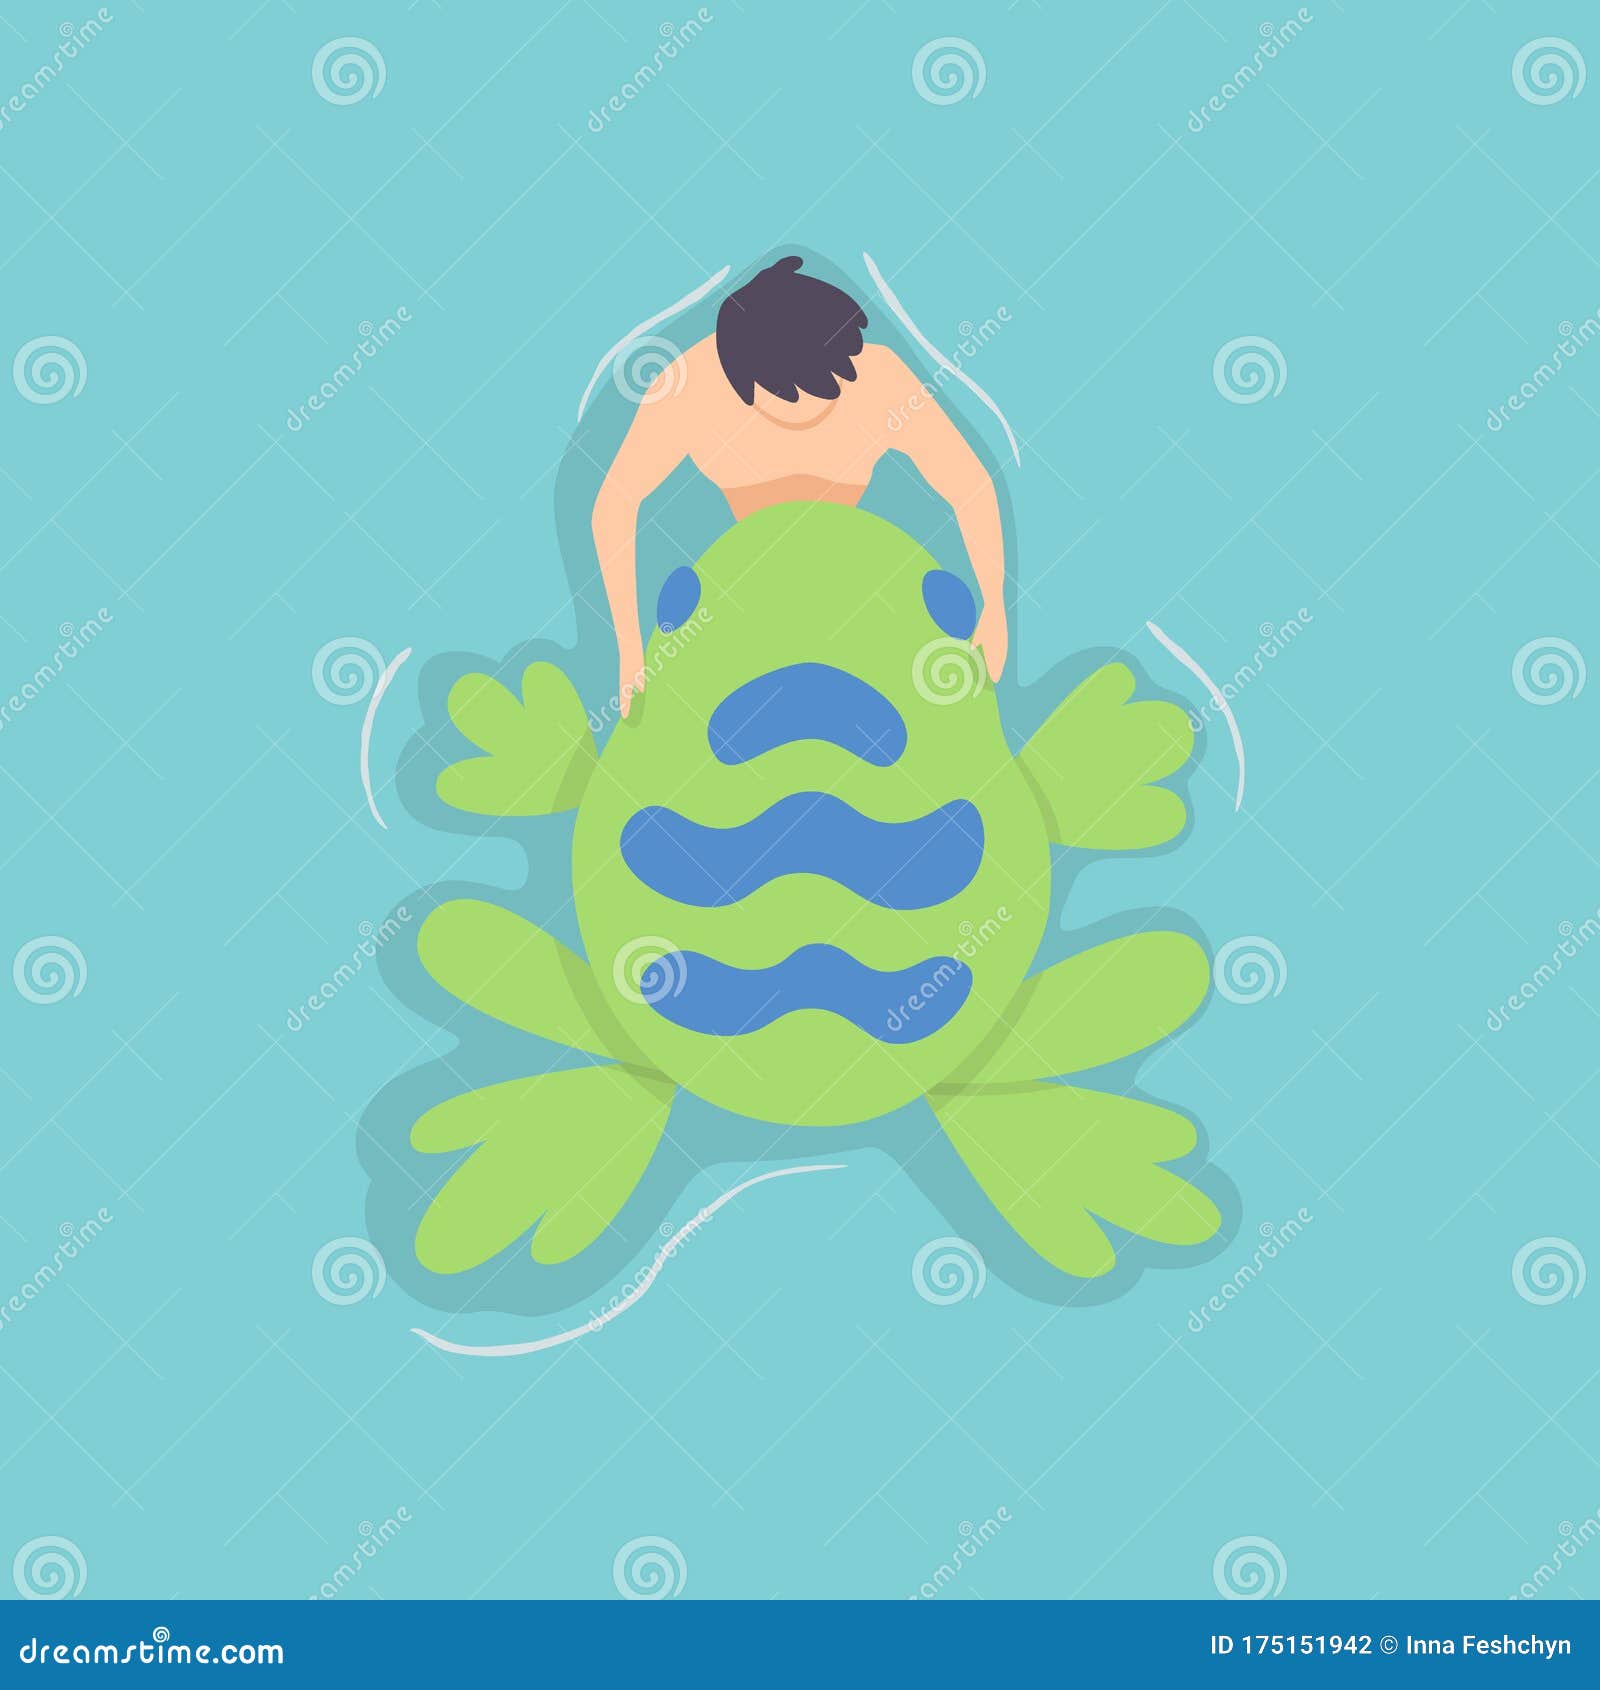 top view persone floating on air mattress in swimming pool. men relaxing and sunbathing on inflatable frog . 